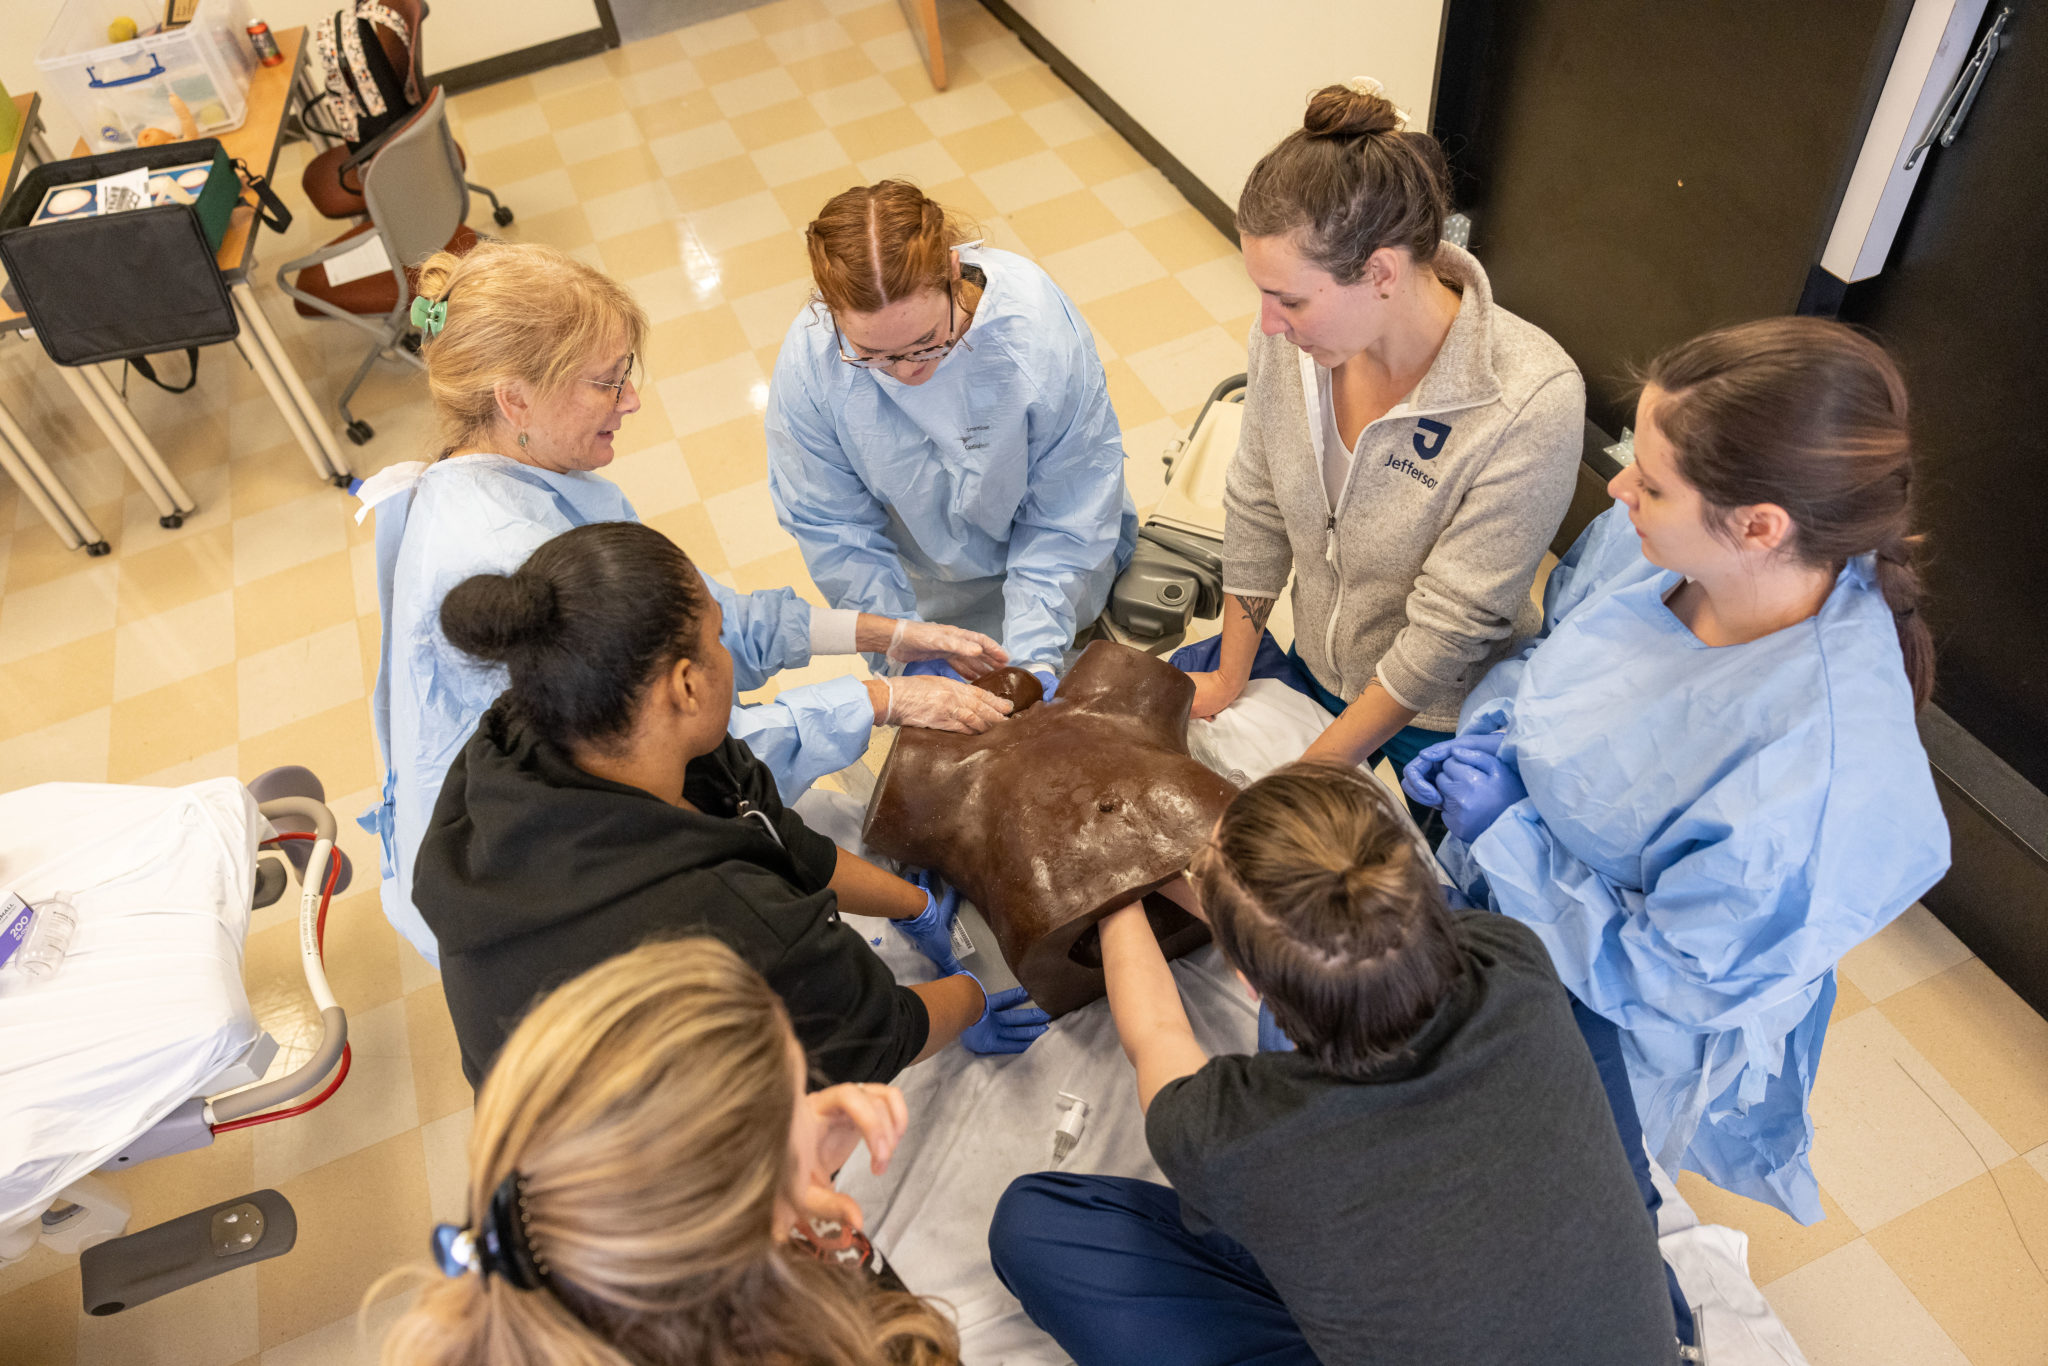 Faculty and students learning birth skills in simulation during an on-campus intensive.